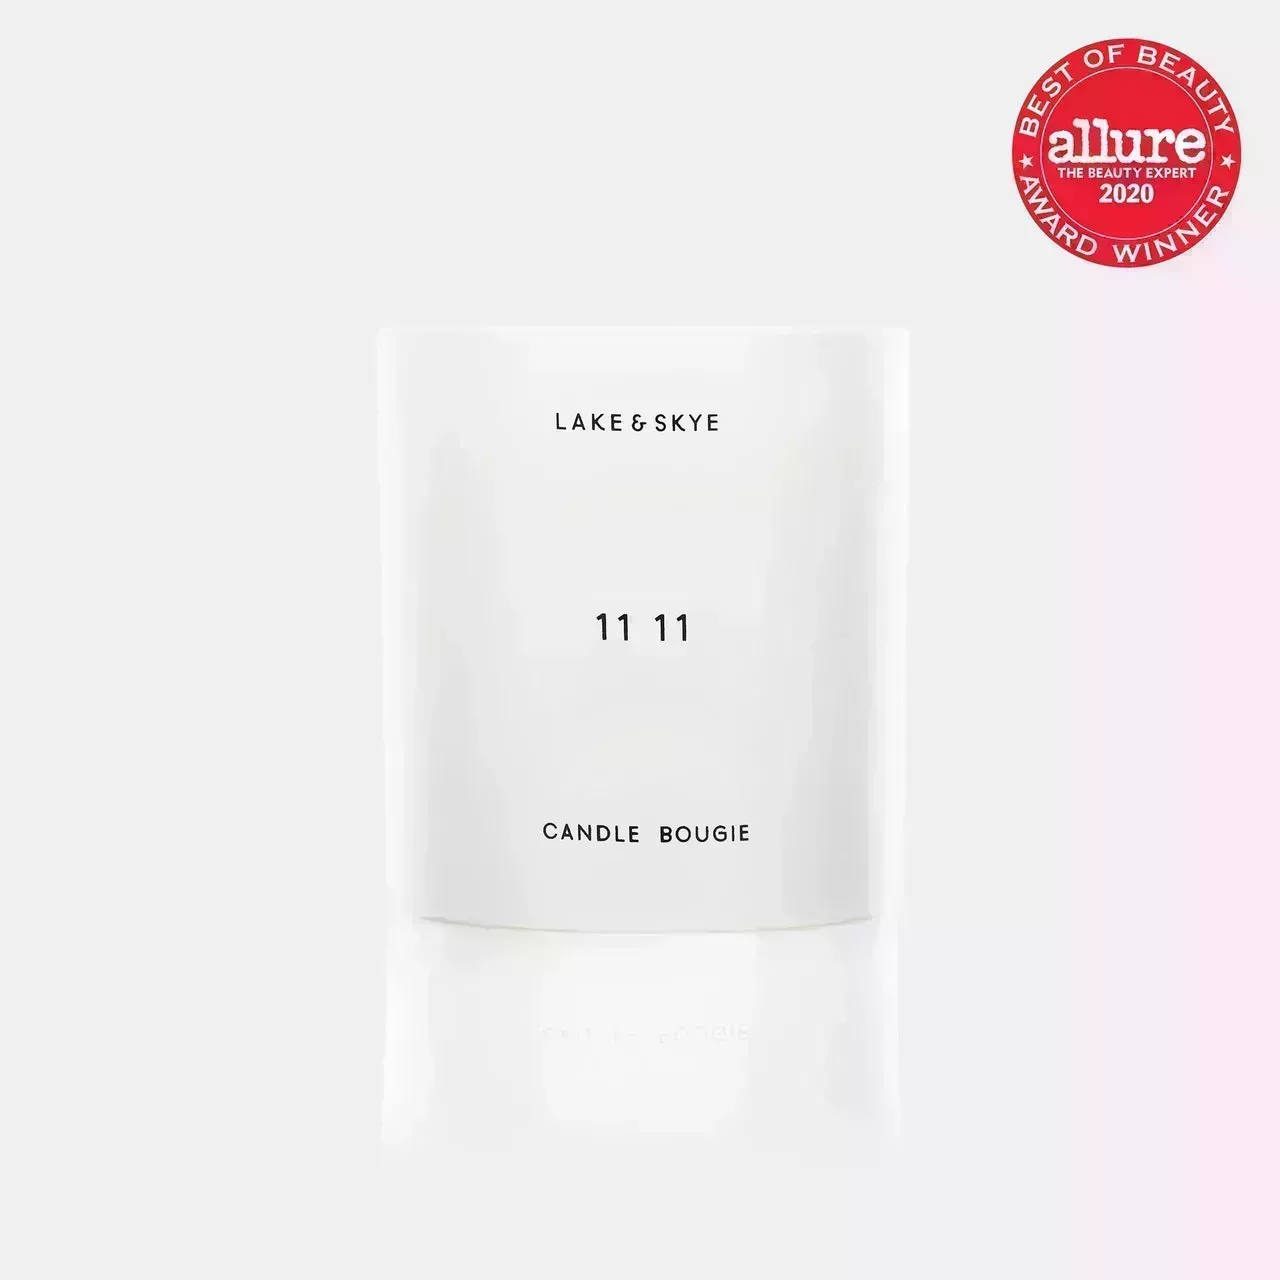 Lake & Skye 11:11 Candle on light gray background with red 2021 Allure Best of Beauty Award seal